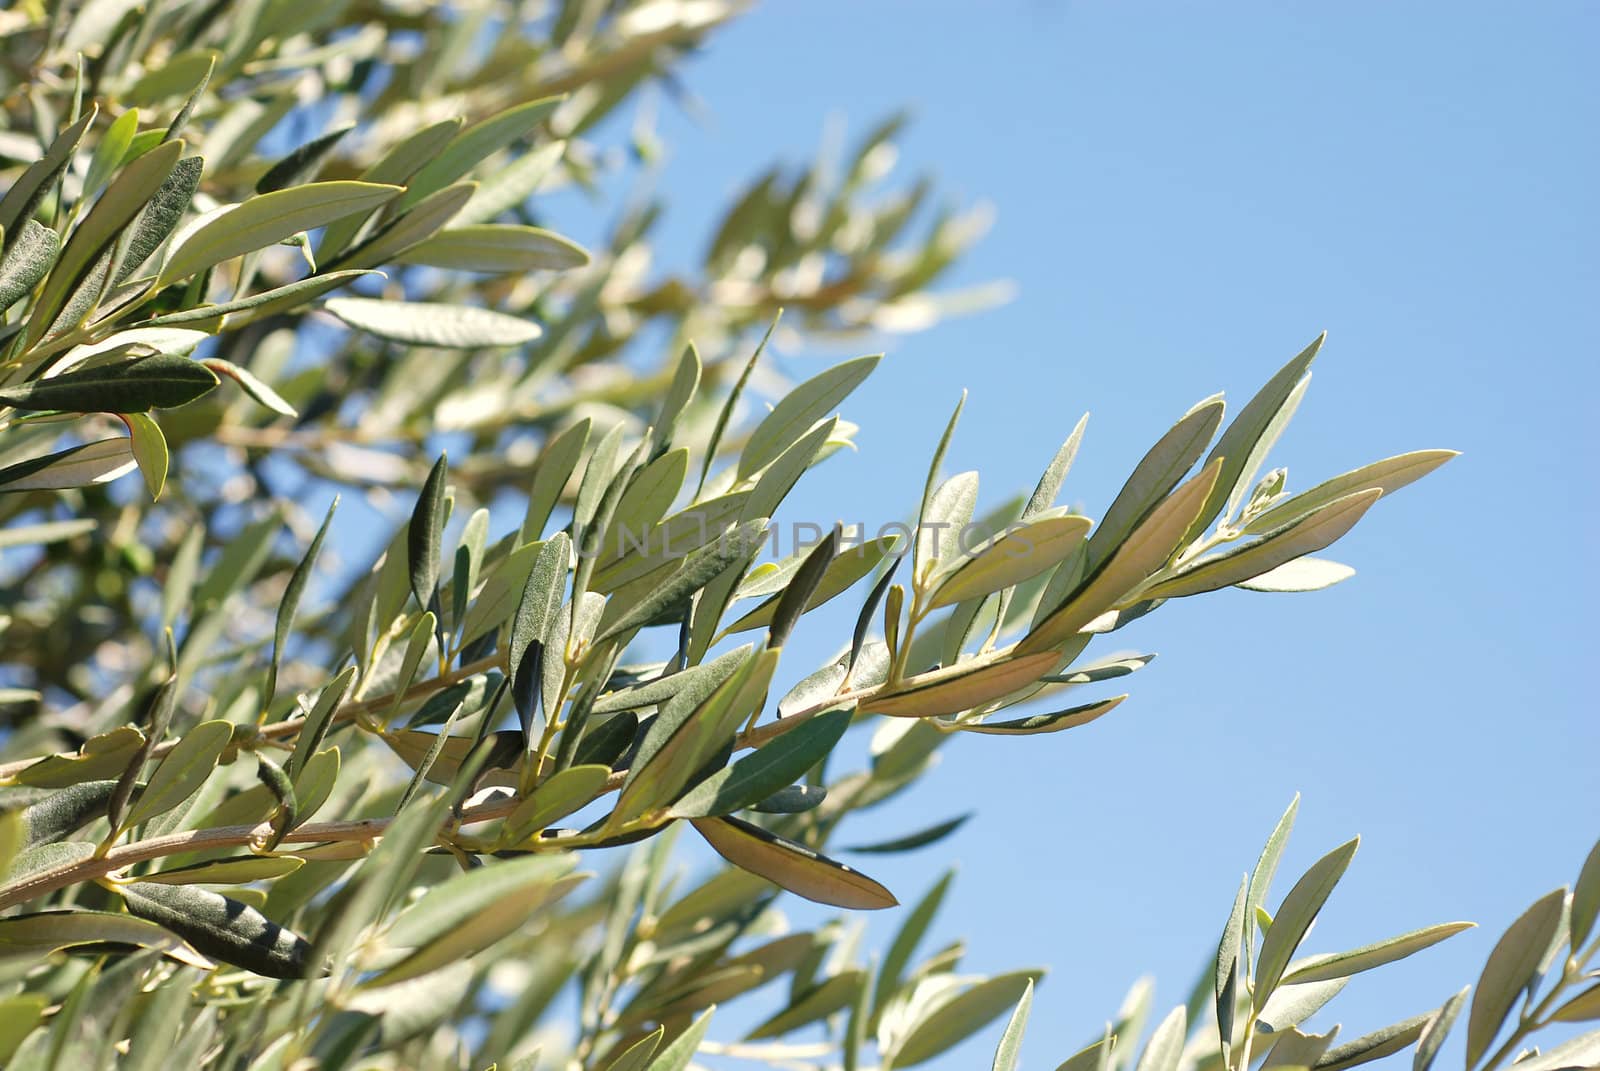 An olive branch.